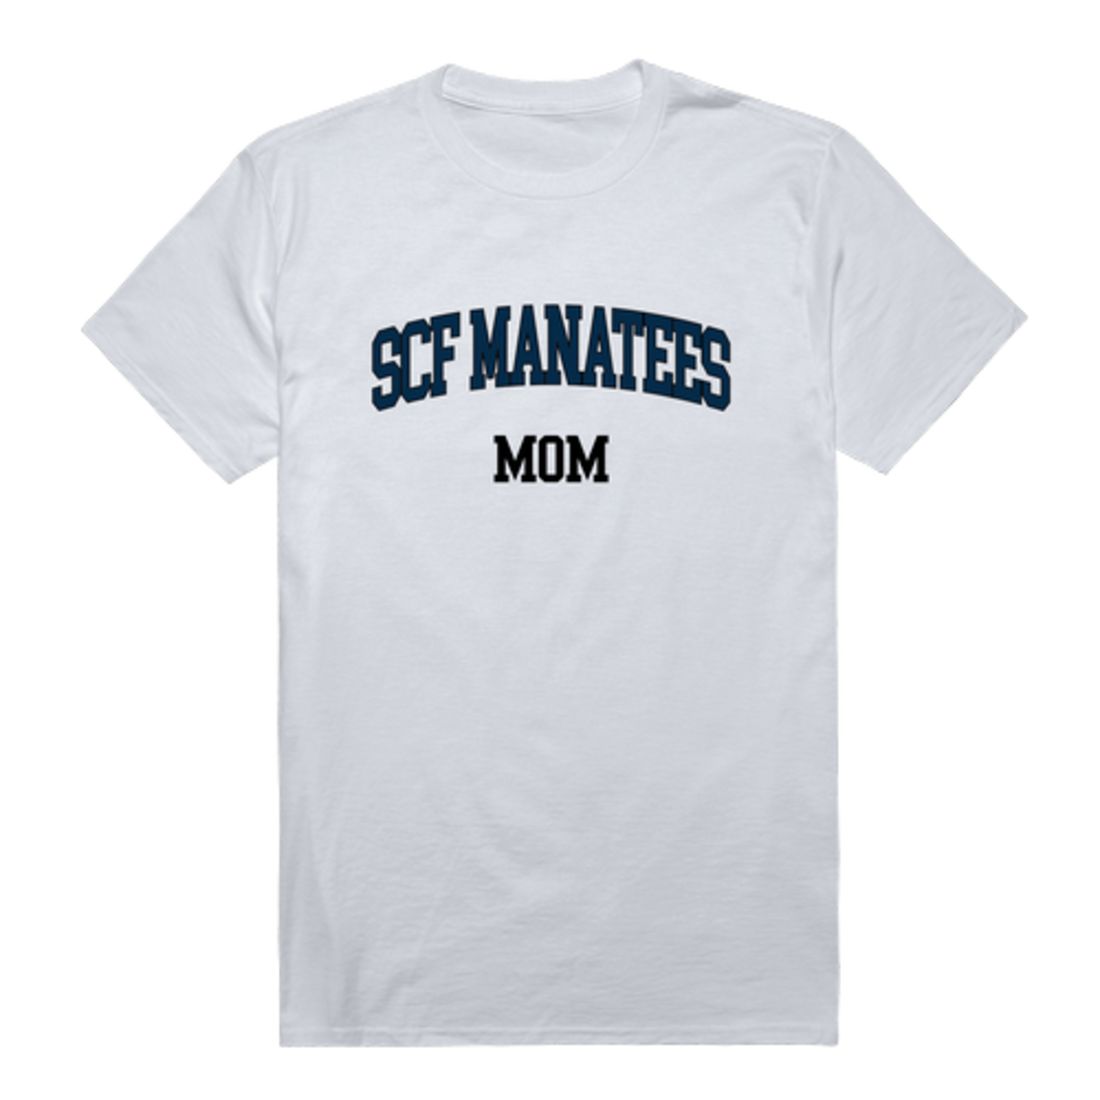 State College of Florida Manatees Mom T-Shirt